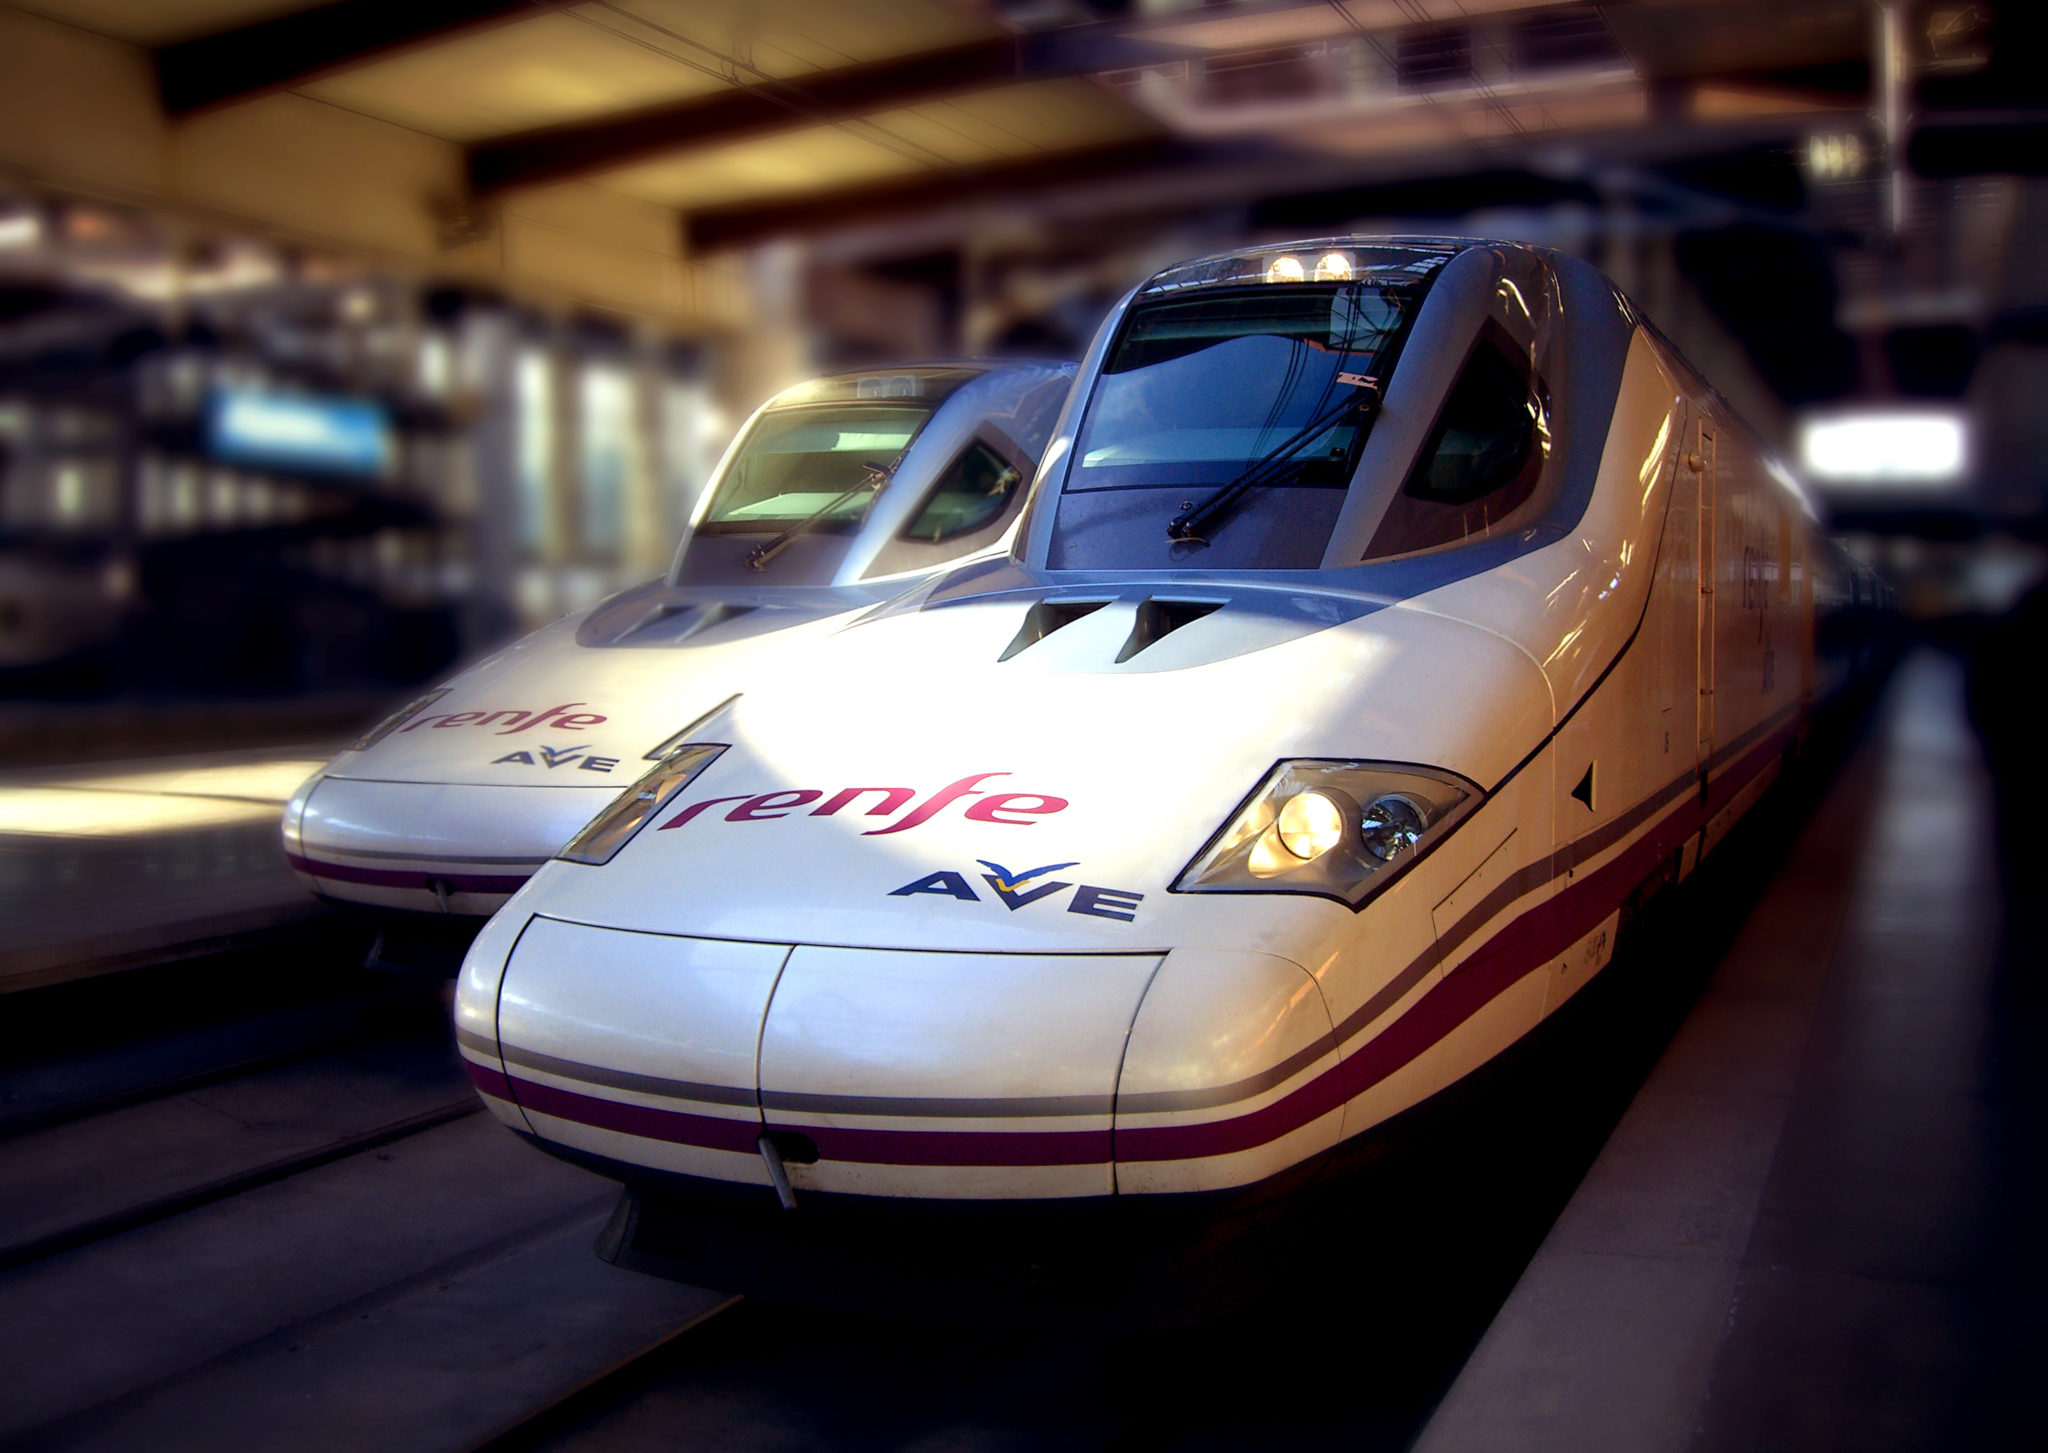 2 Talgo 350 high-speed trains for Renfe in Spain